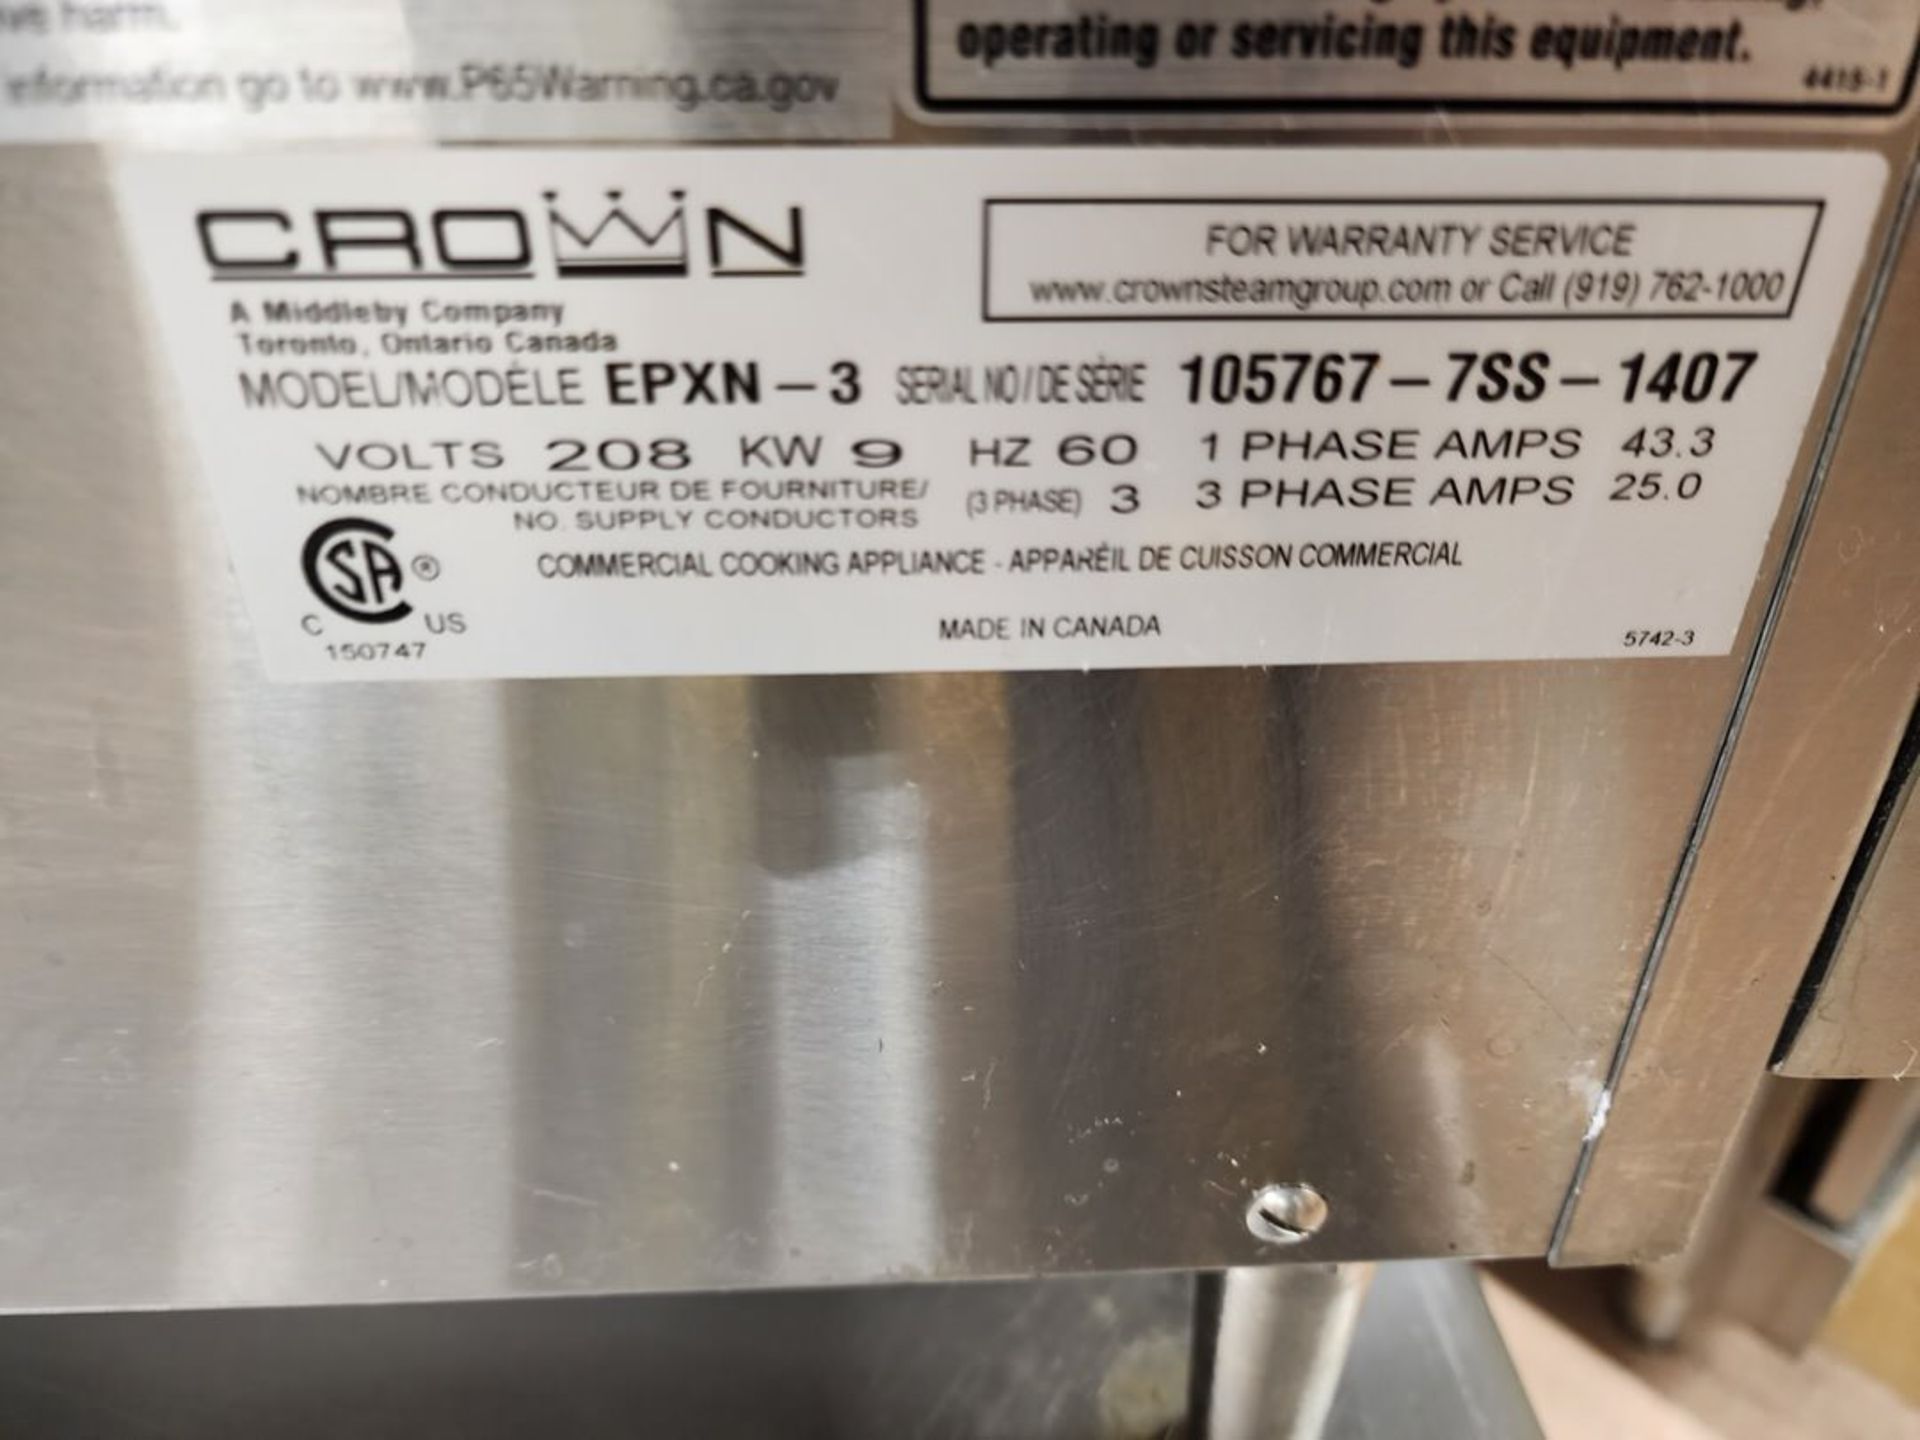 Crown EPXN-3 Pan Convection Steamer 208V, 9kw, 1/3PH - Image 6 of 8